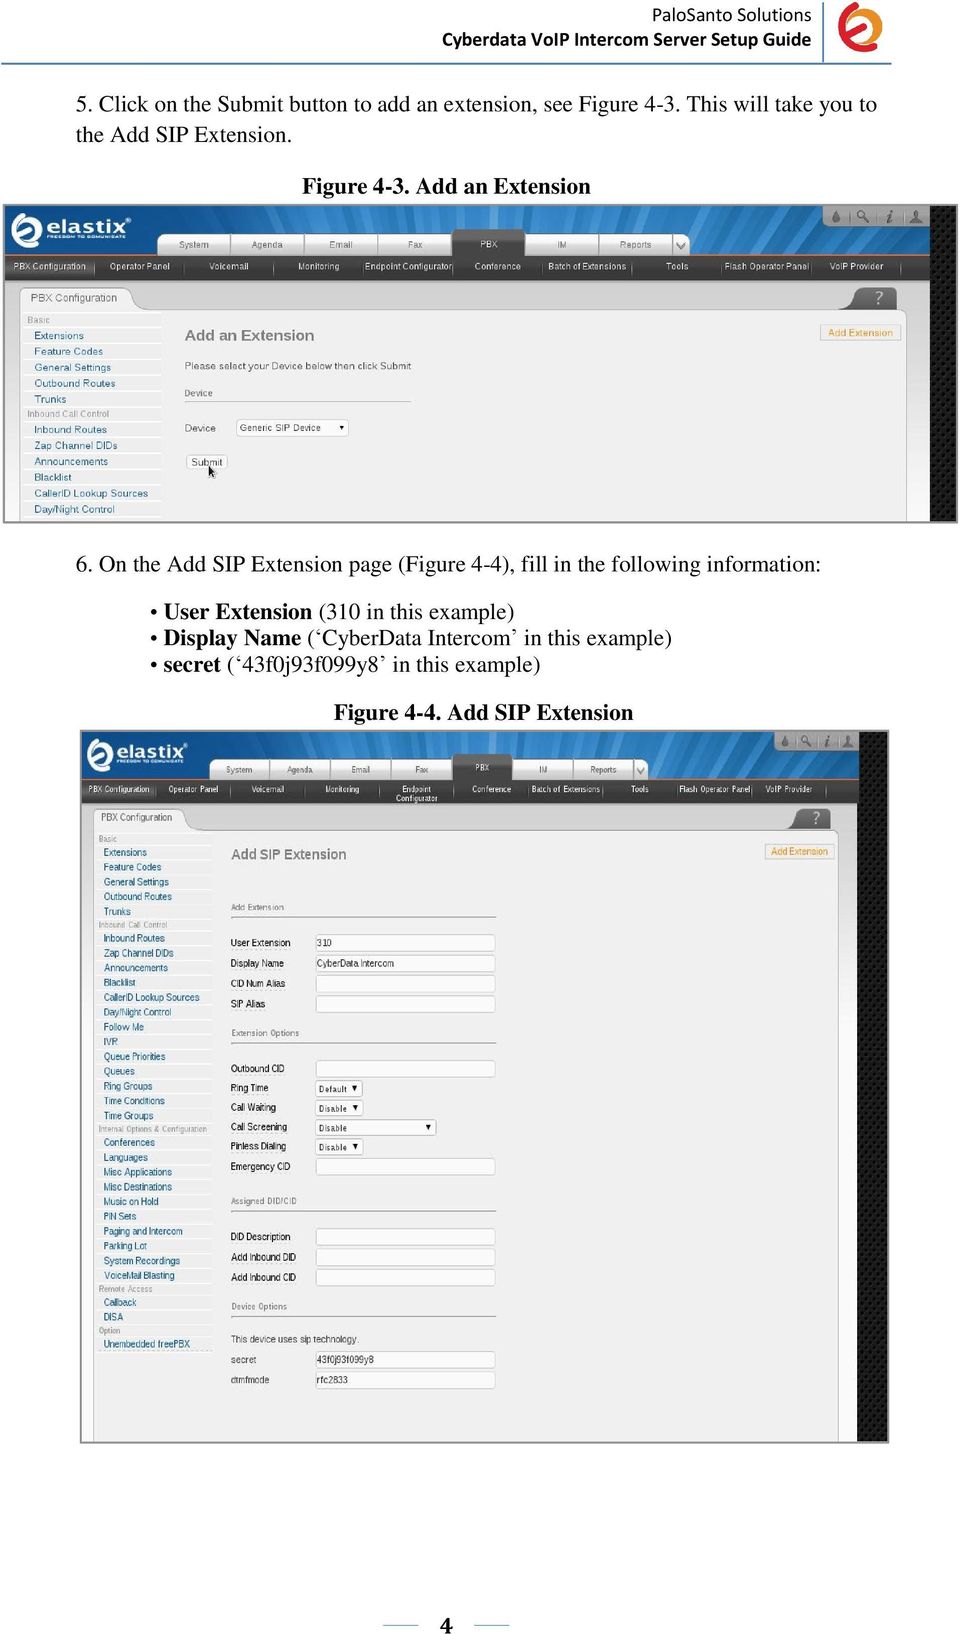 On the Add SIP Extension page (Figure 4-4), fill in the following information: User Extension